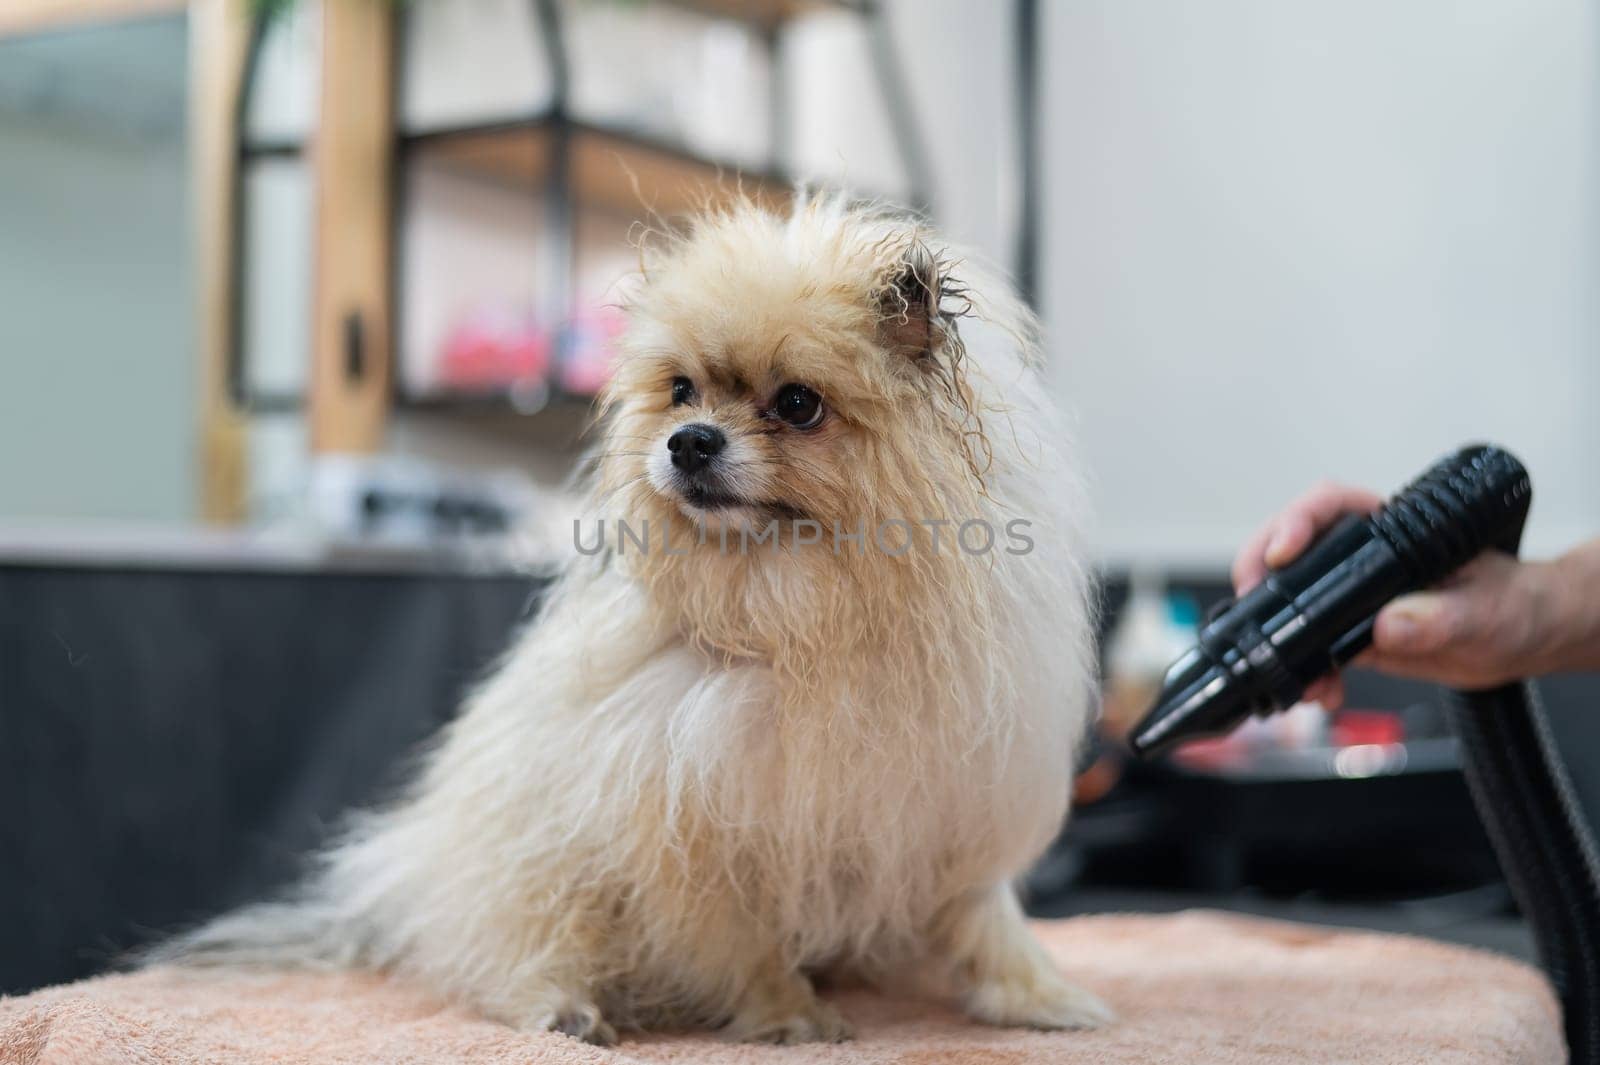 A woman dries a Pomeranian with a hair dryer after washing in a grooming salon